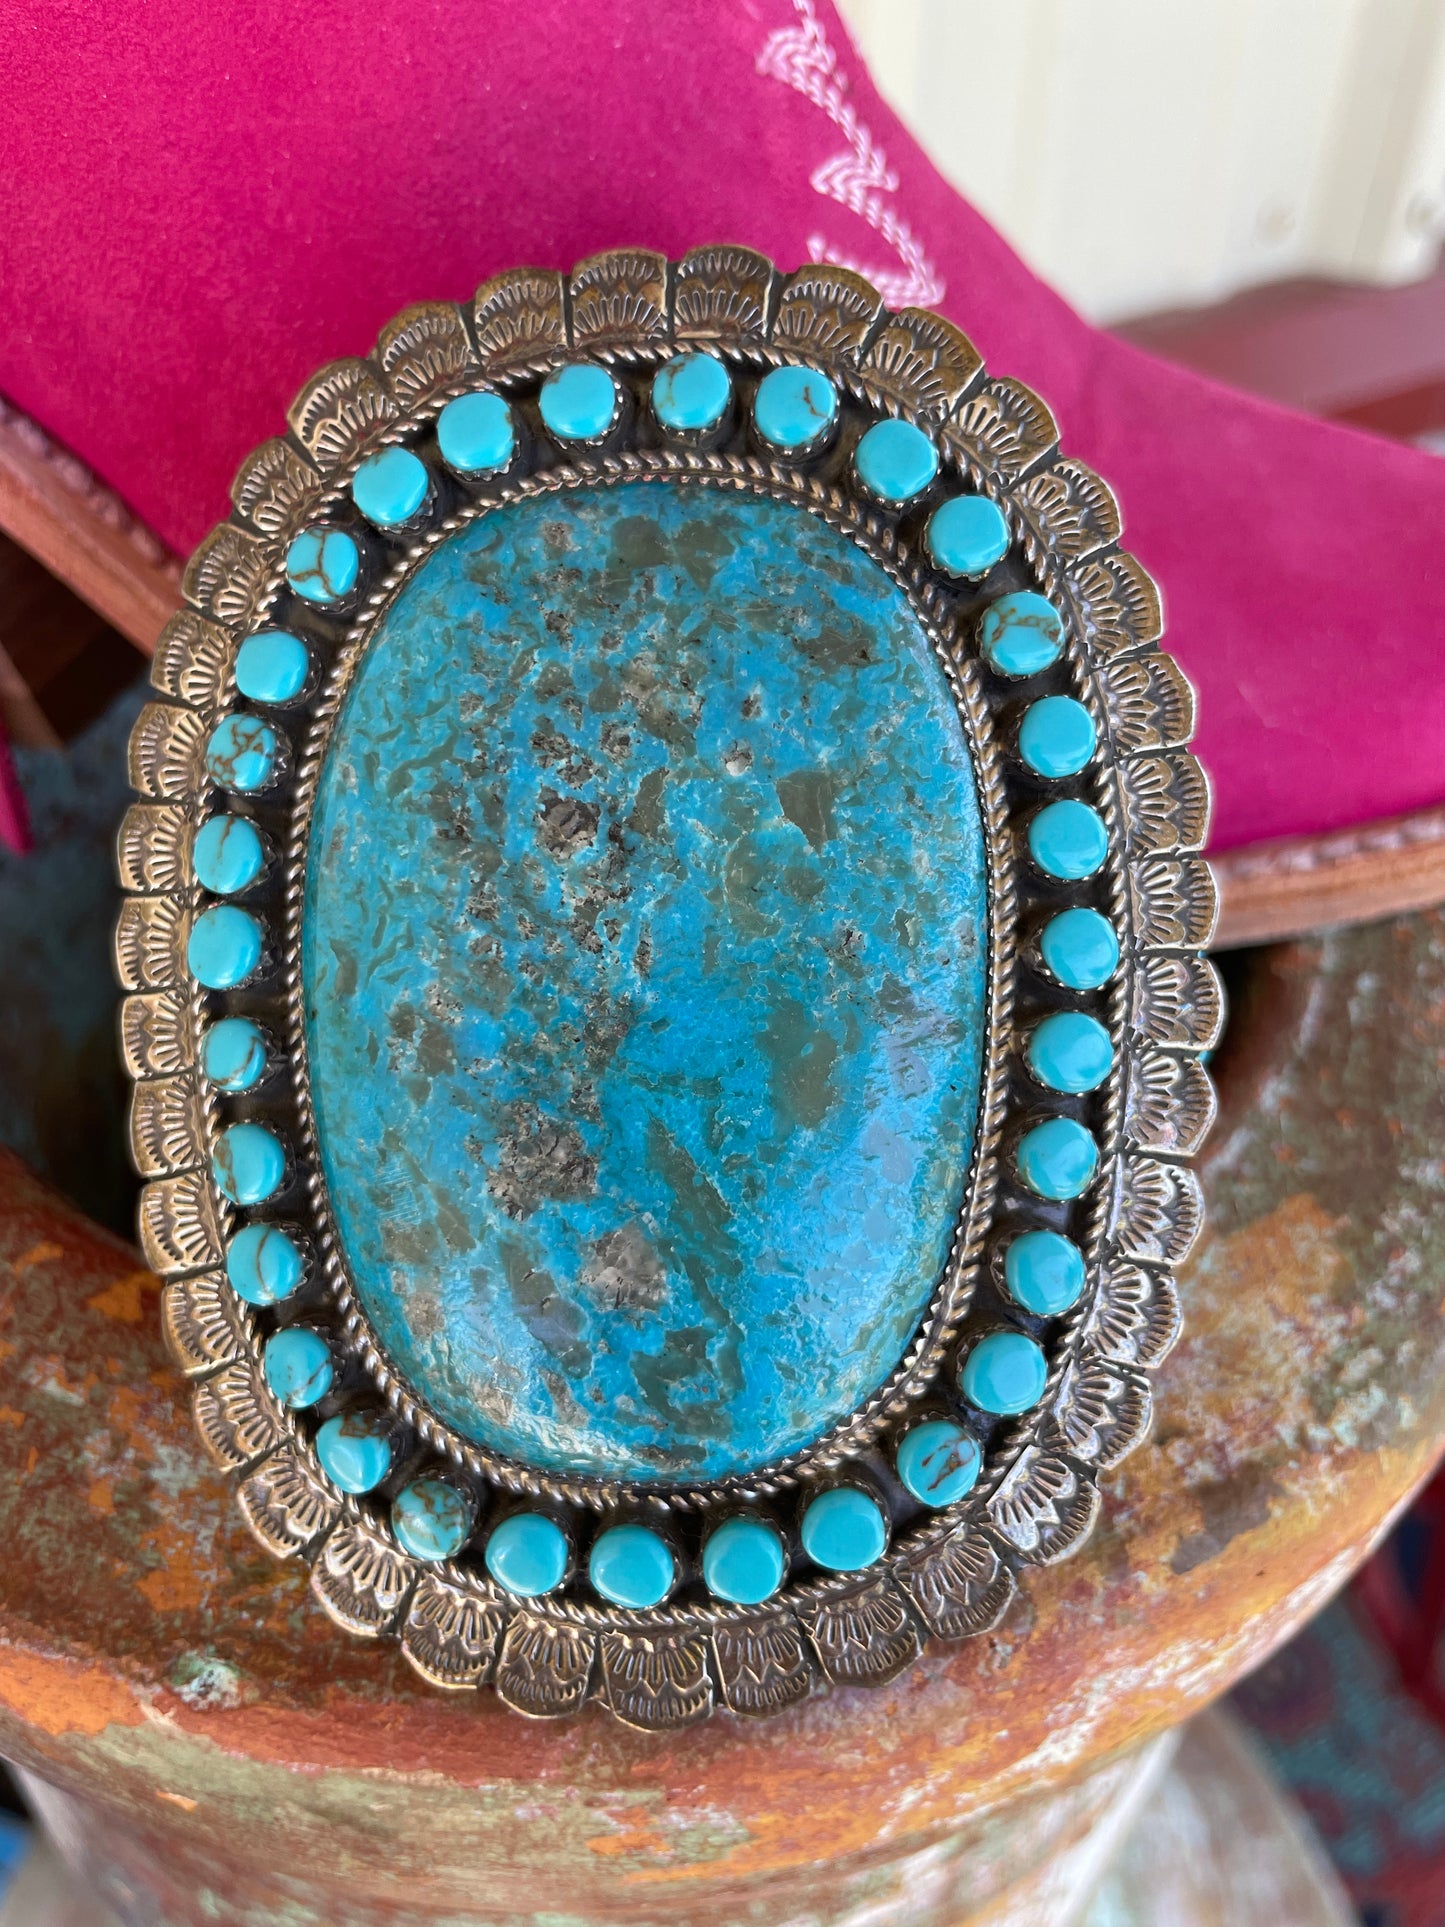 The Queen Turquoise Cuff